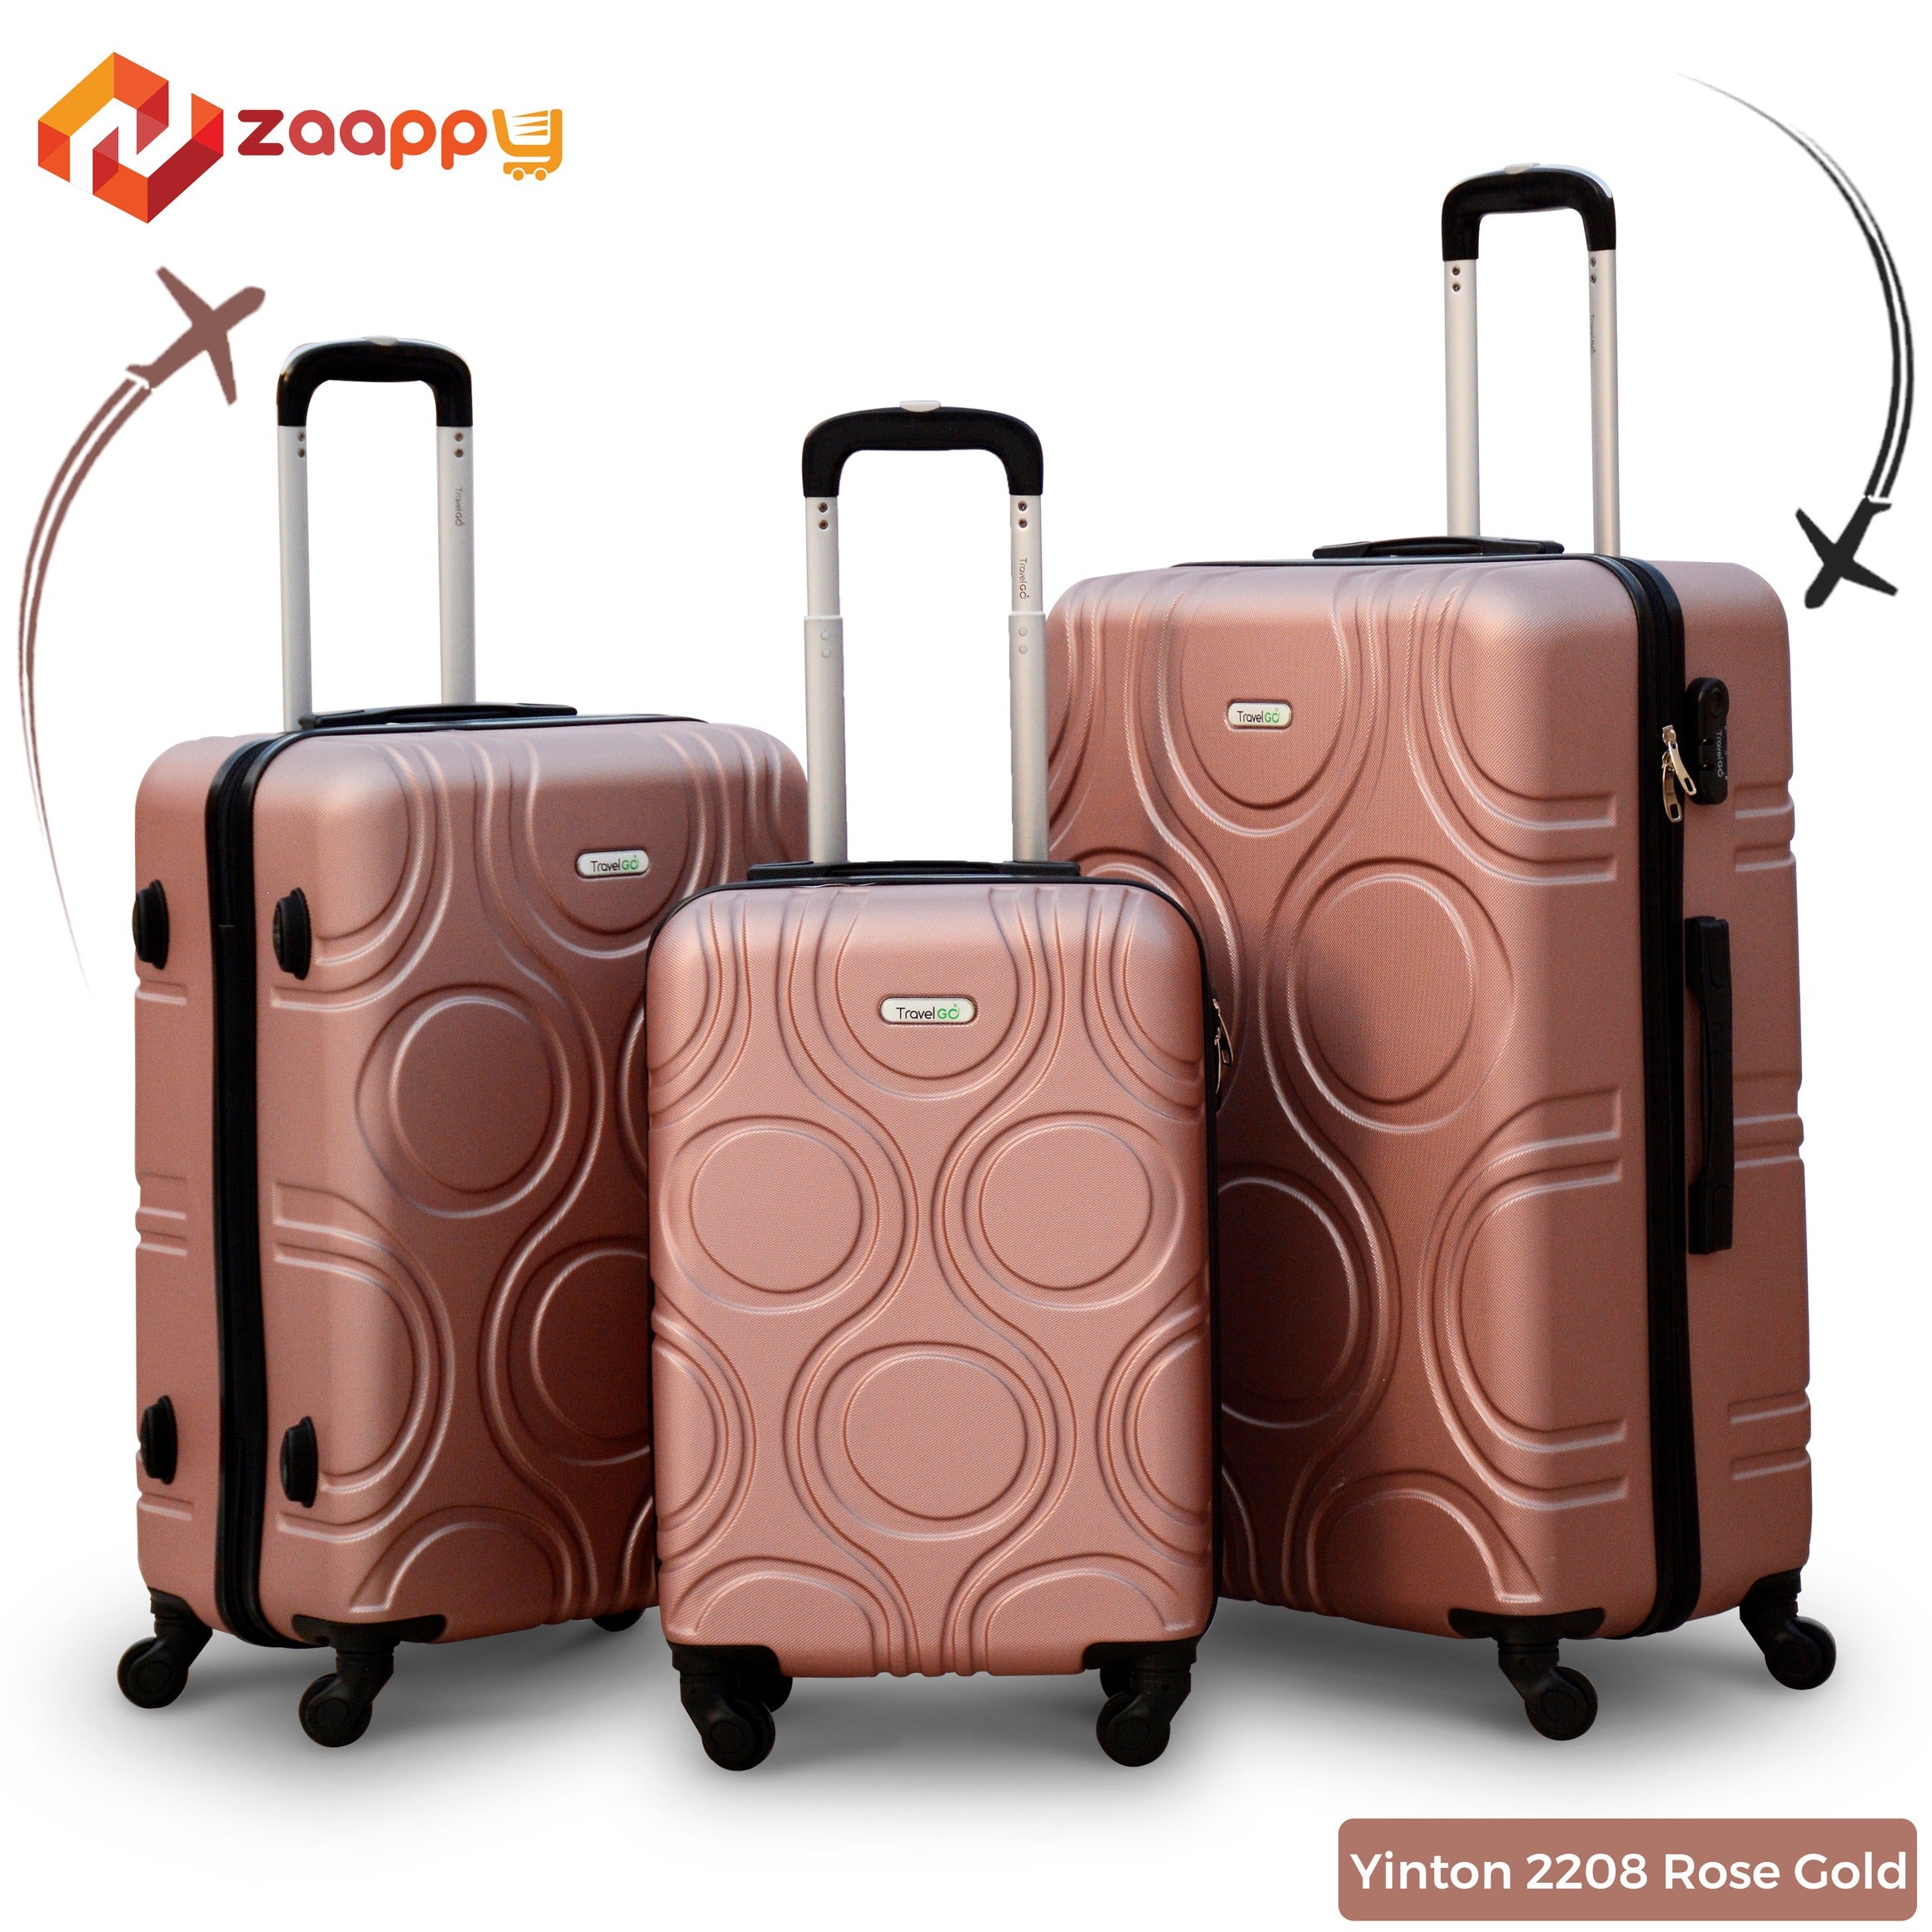 Lightweight ABS Luggage | Hard Case Trolley Bag | 3 Pcs Set 20” 24” 28 Inches | Yinton 2208 Rose Gold